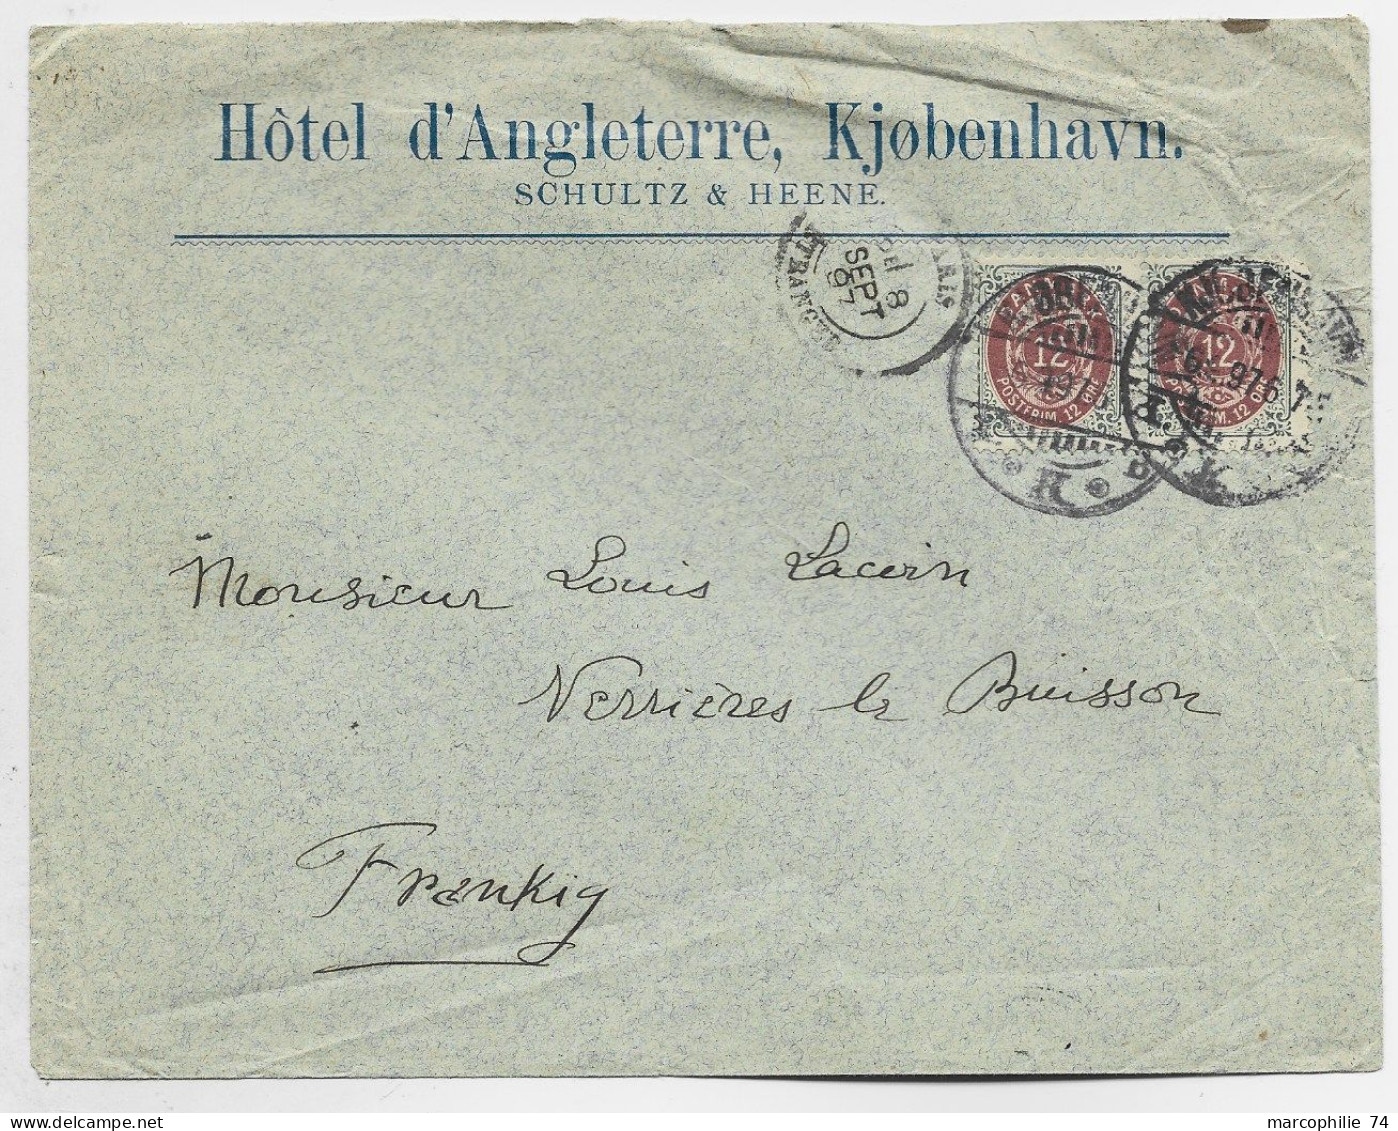 DANMARK 12 ORE PAIRE LETTRE COVER ENTETE HOTEL D'ANGLETERRE 1897  TO FRANCE - Covers & Documents